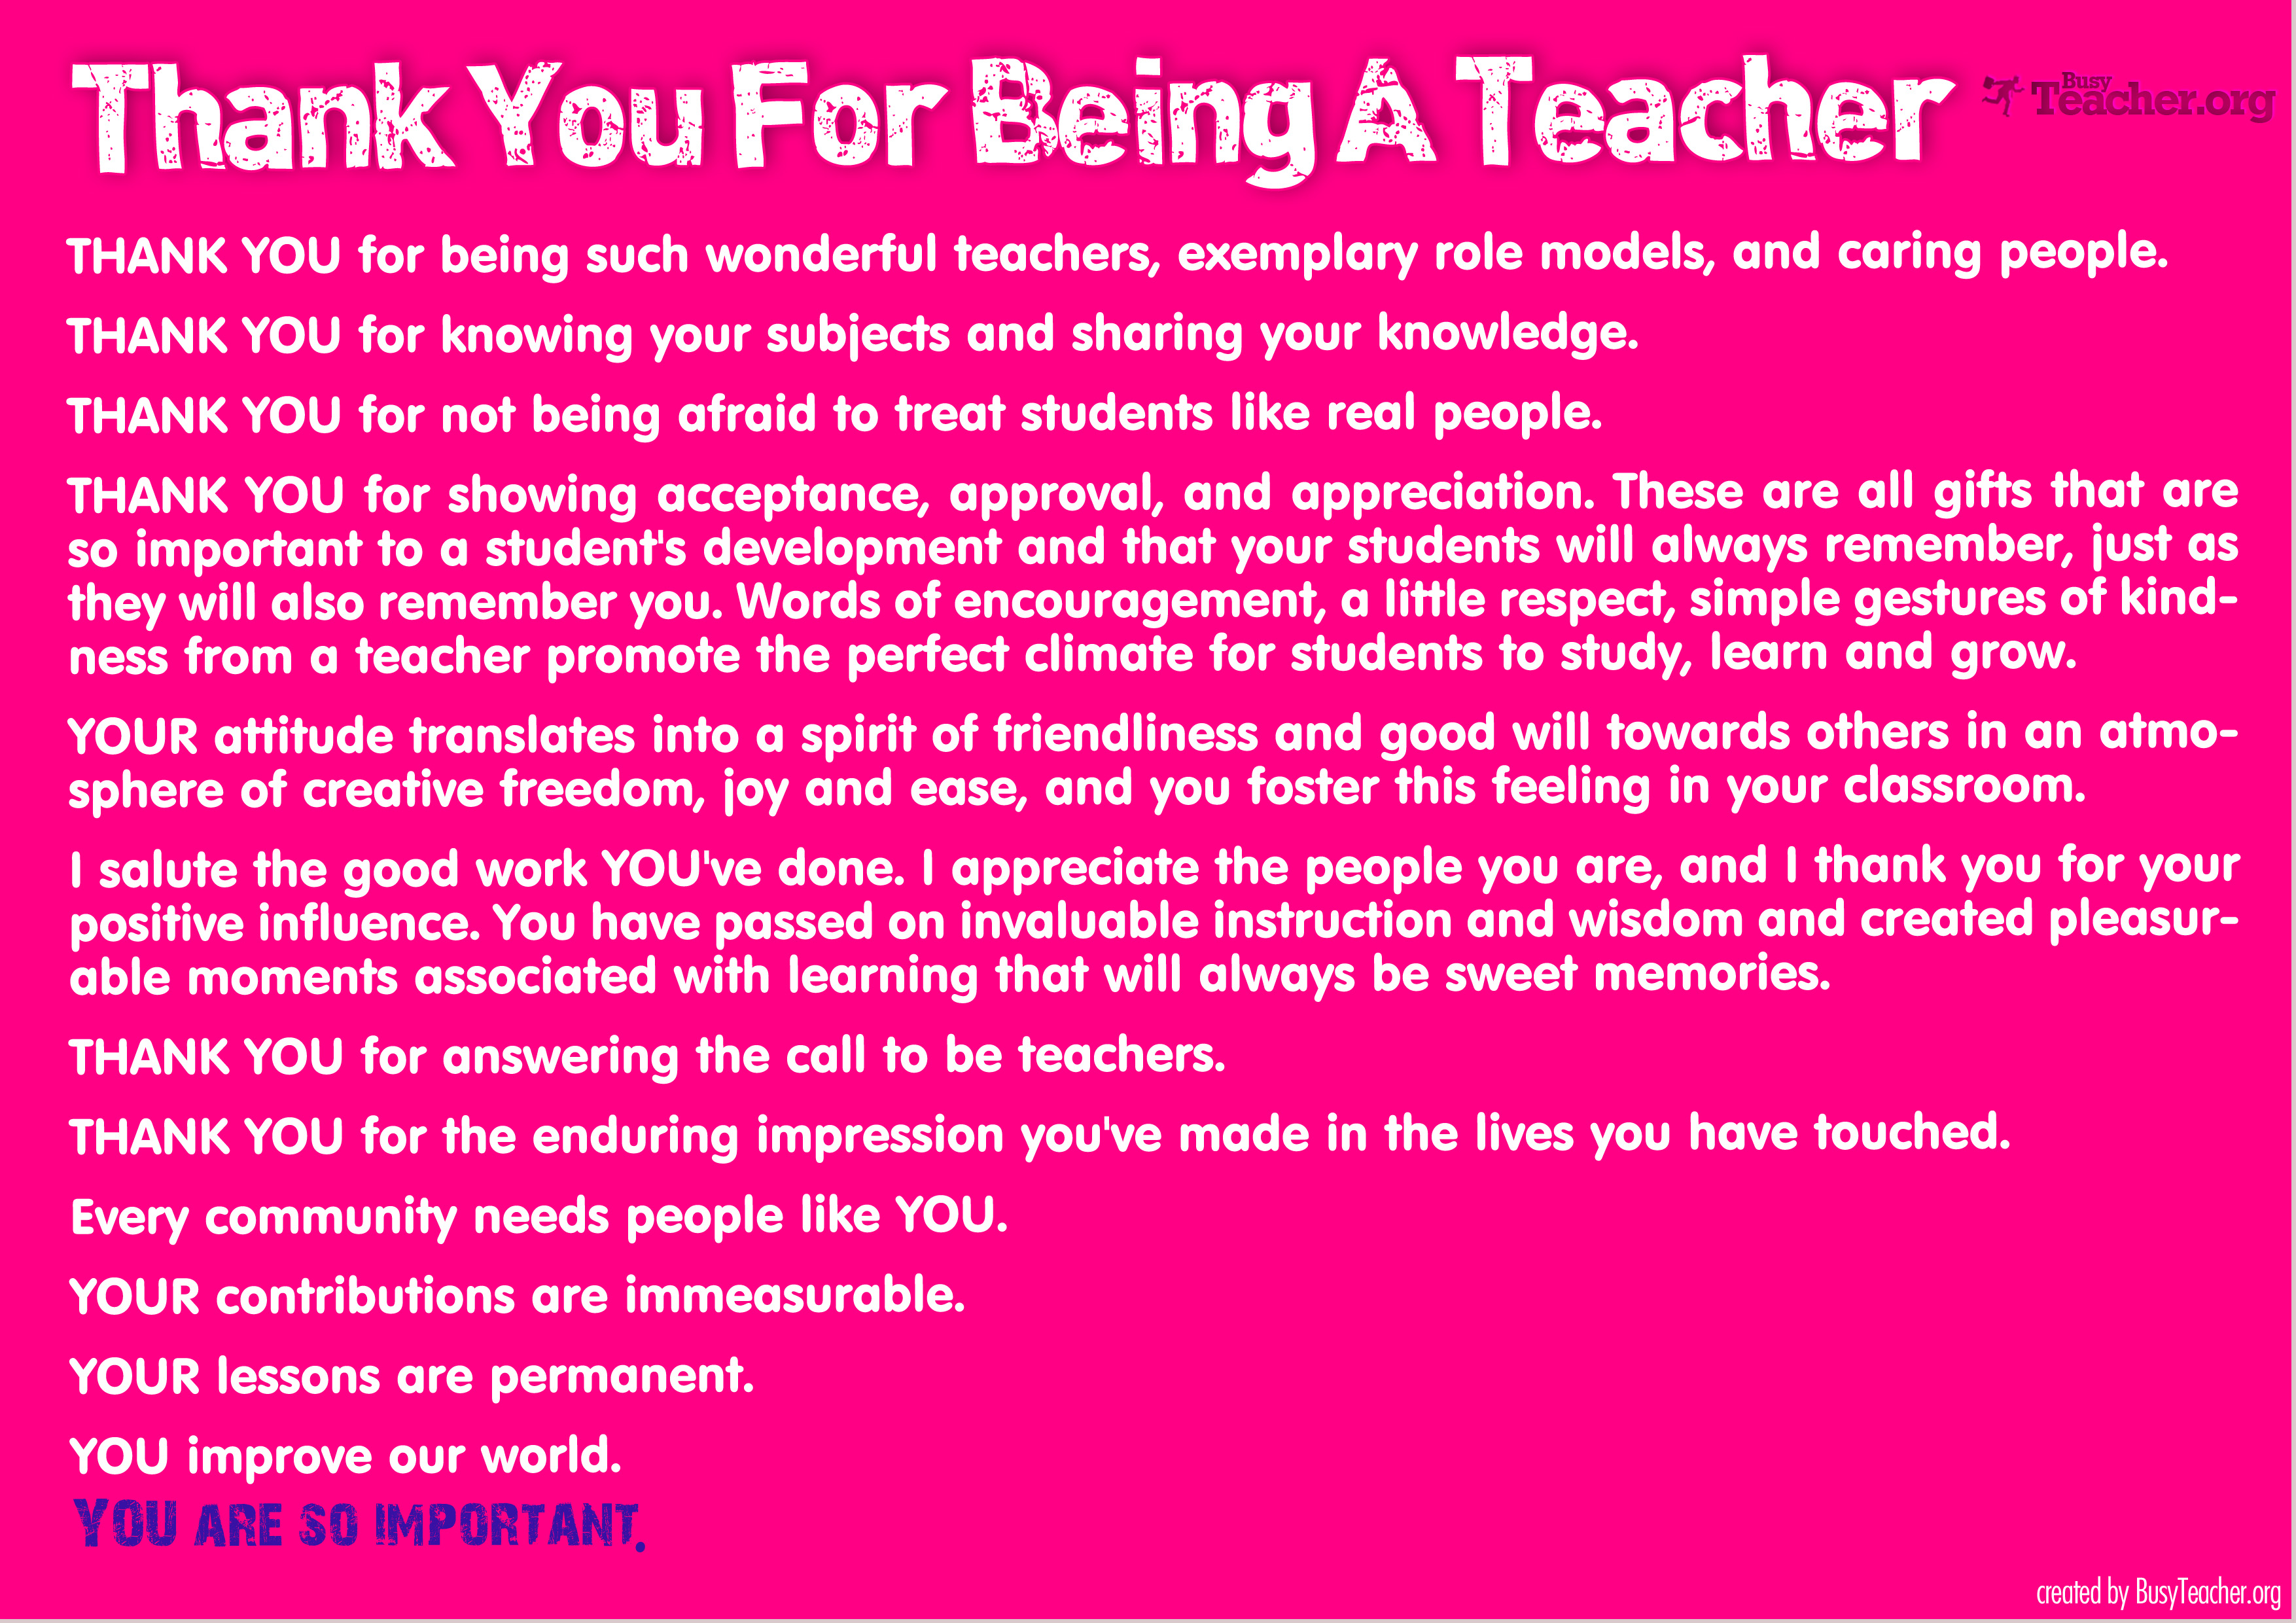 Thank You For Being A Teacher Poster